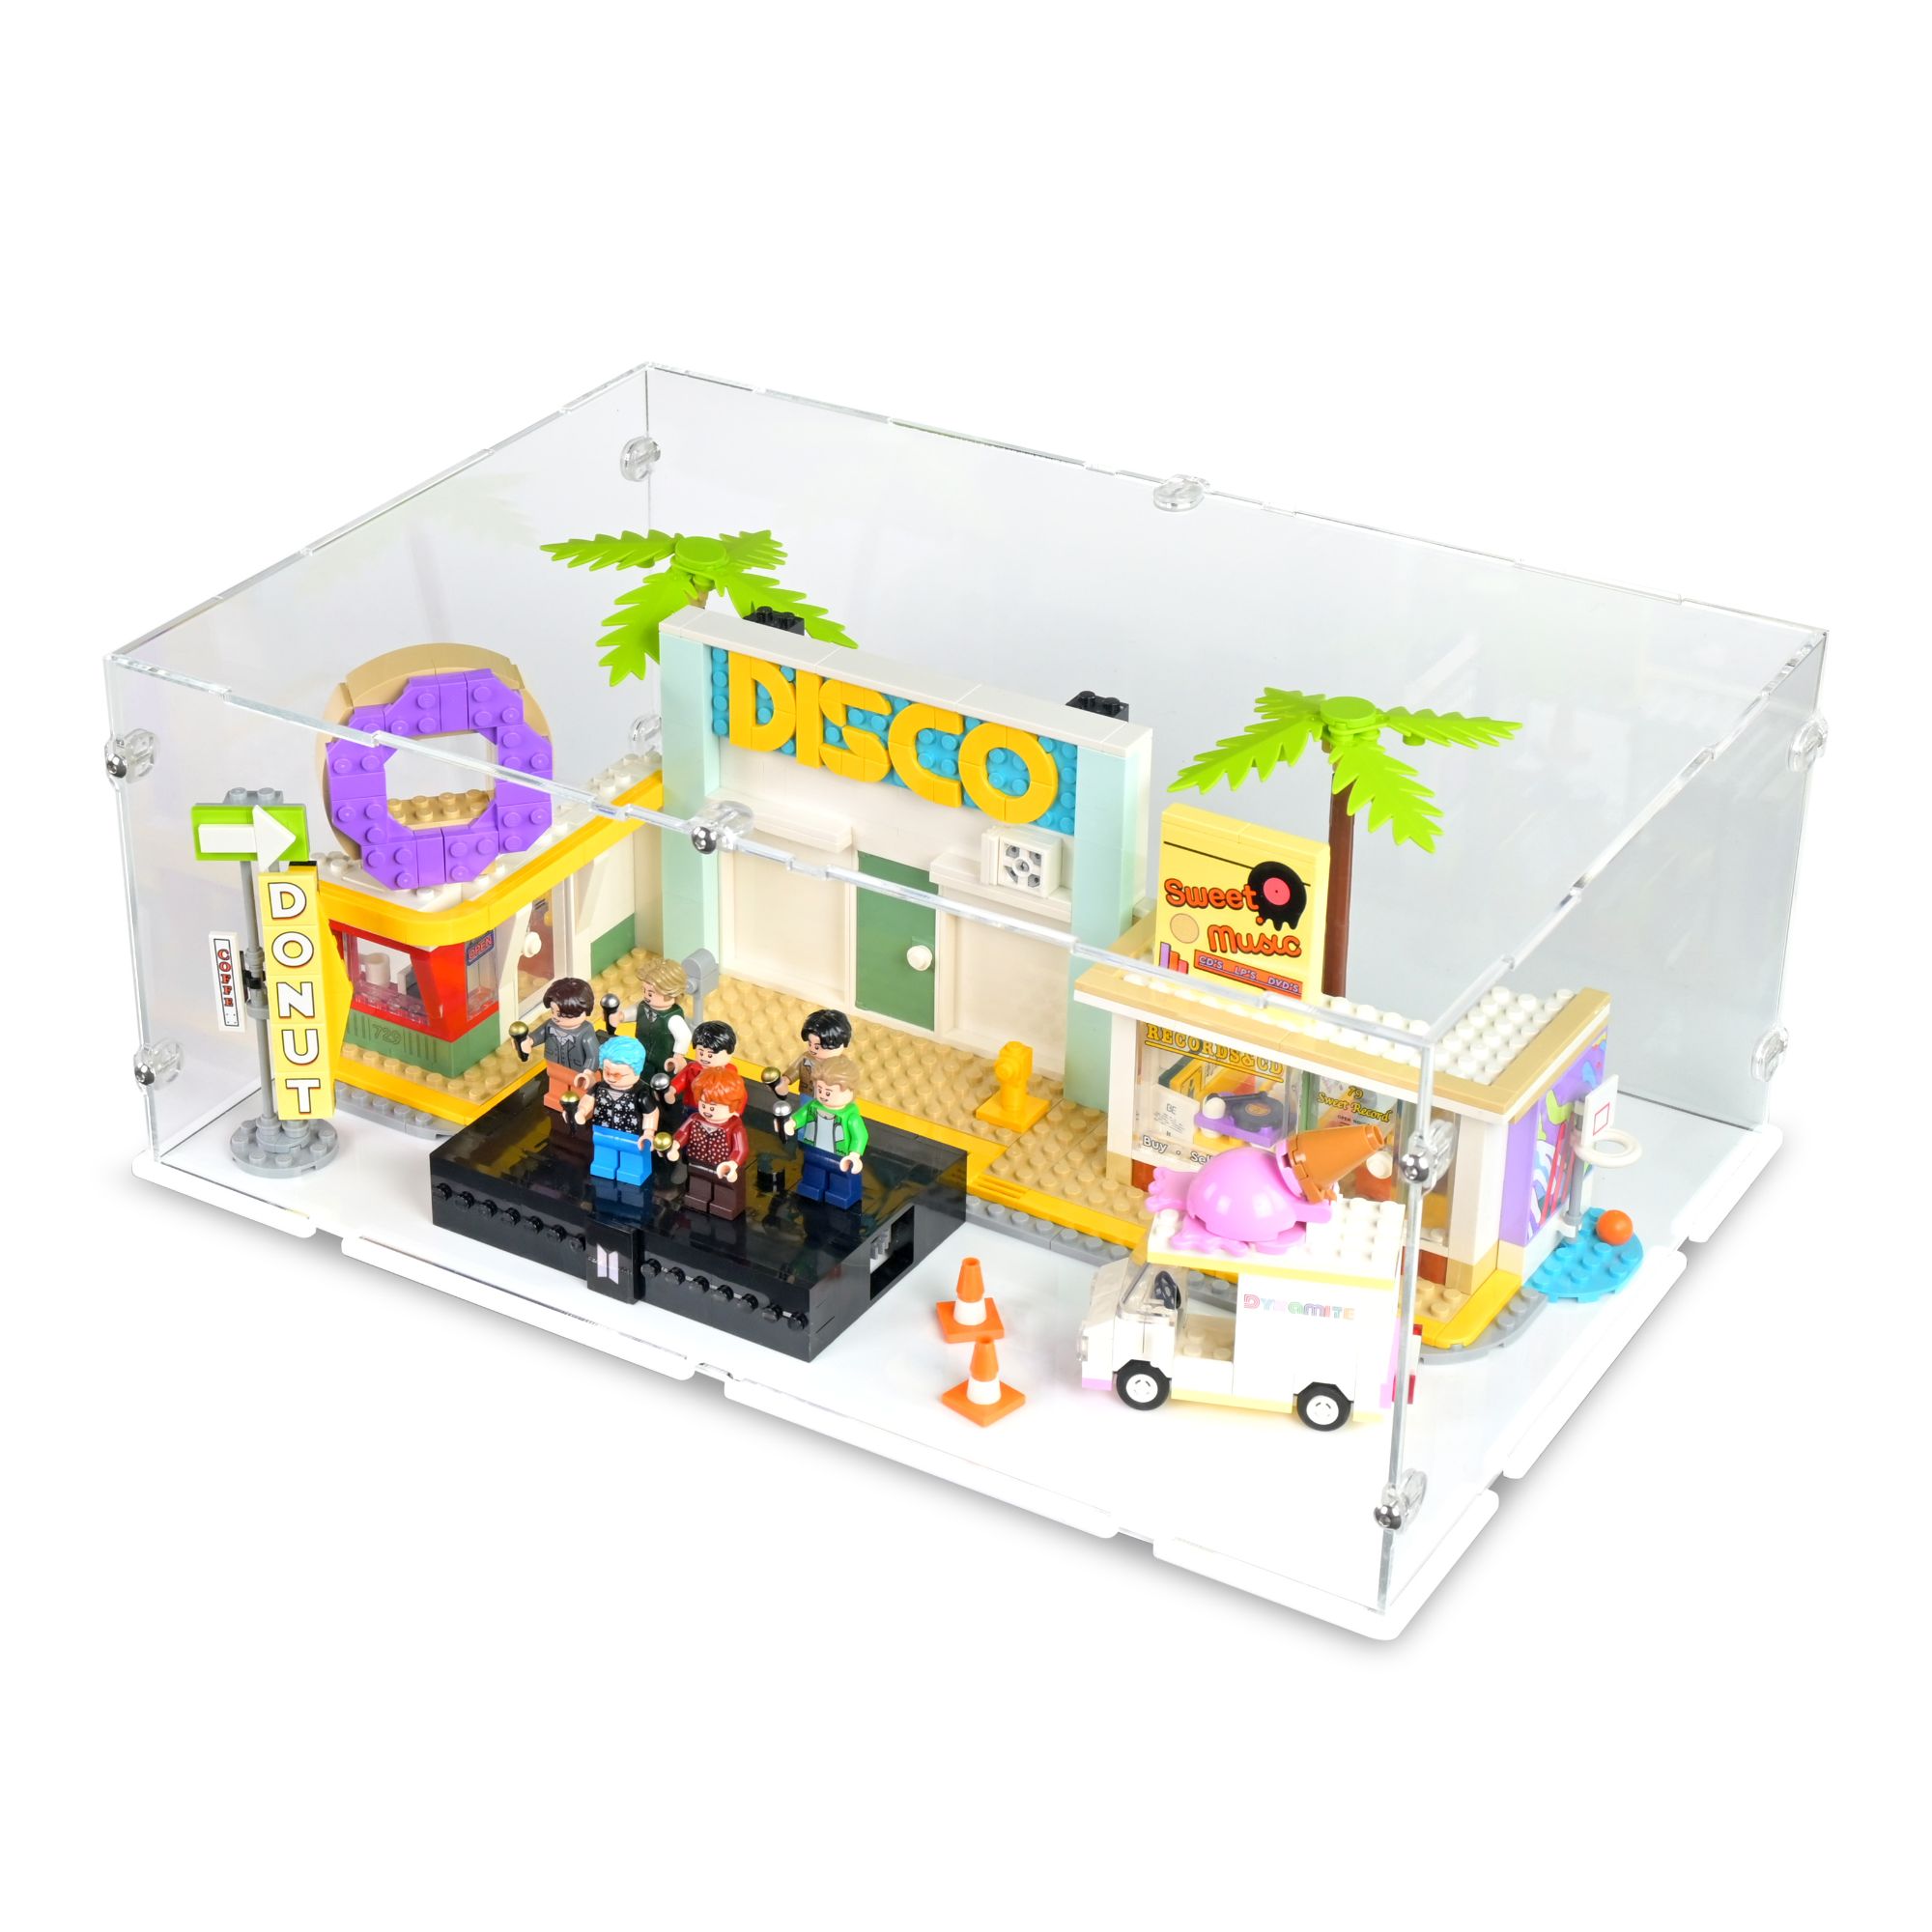  Jetlet 3mm Acrylic Display Box, Dustproof Cover, Compatible  with Lego 21339 Bulletproof Boys Group Blocks Set (S-Grade/Glueless  Version, Display Box Only, The Model Not Included) : Toys & Games